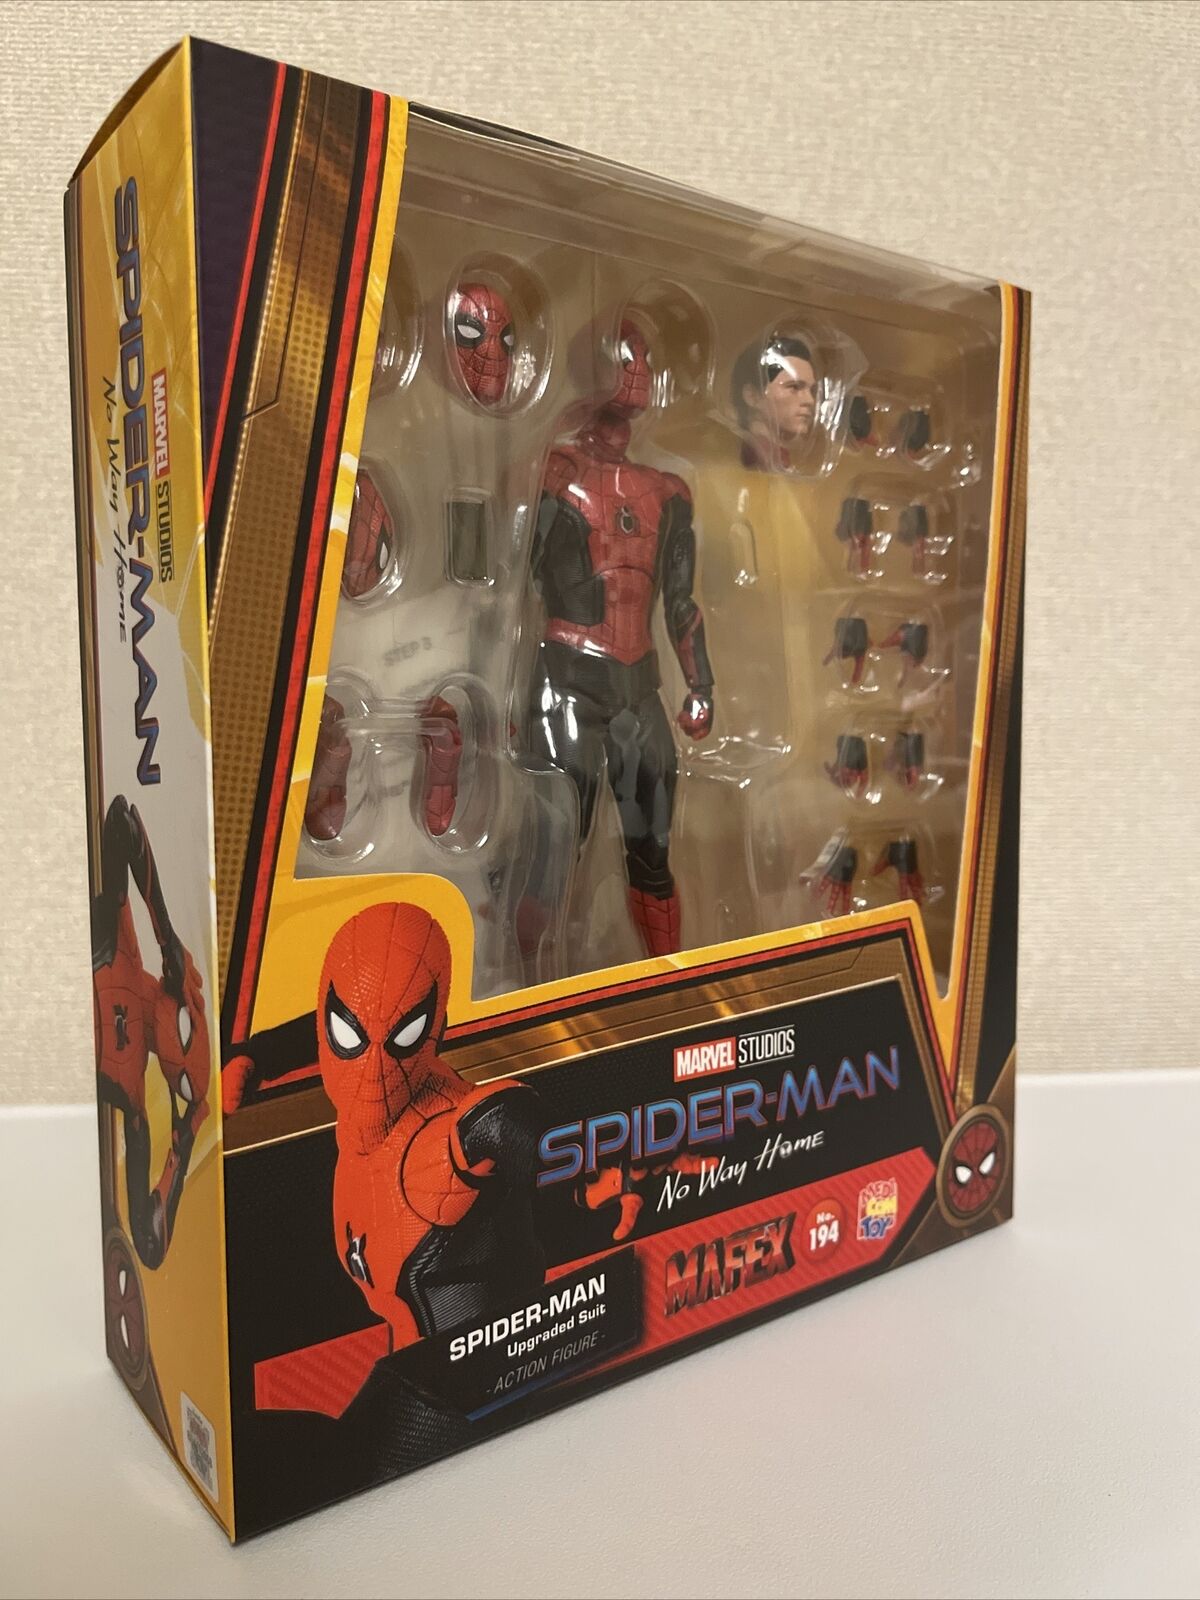 No.194 MAFEX SPIDER-MAN UPGRADED SUIT (NO WAY HOME) by MEDICOM TOY